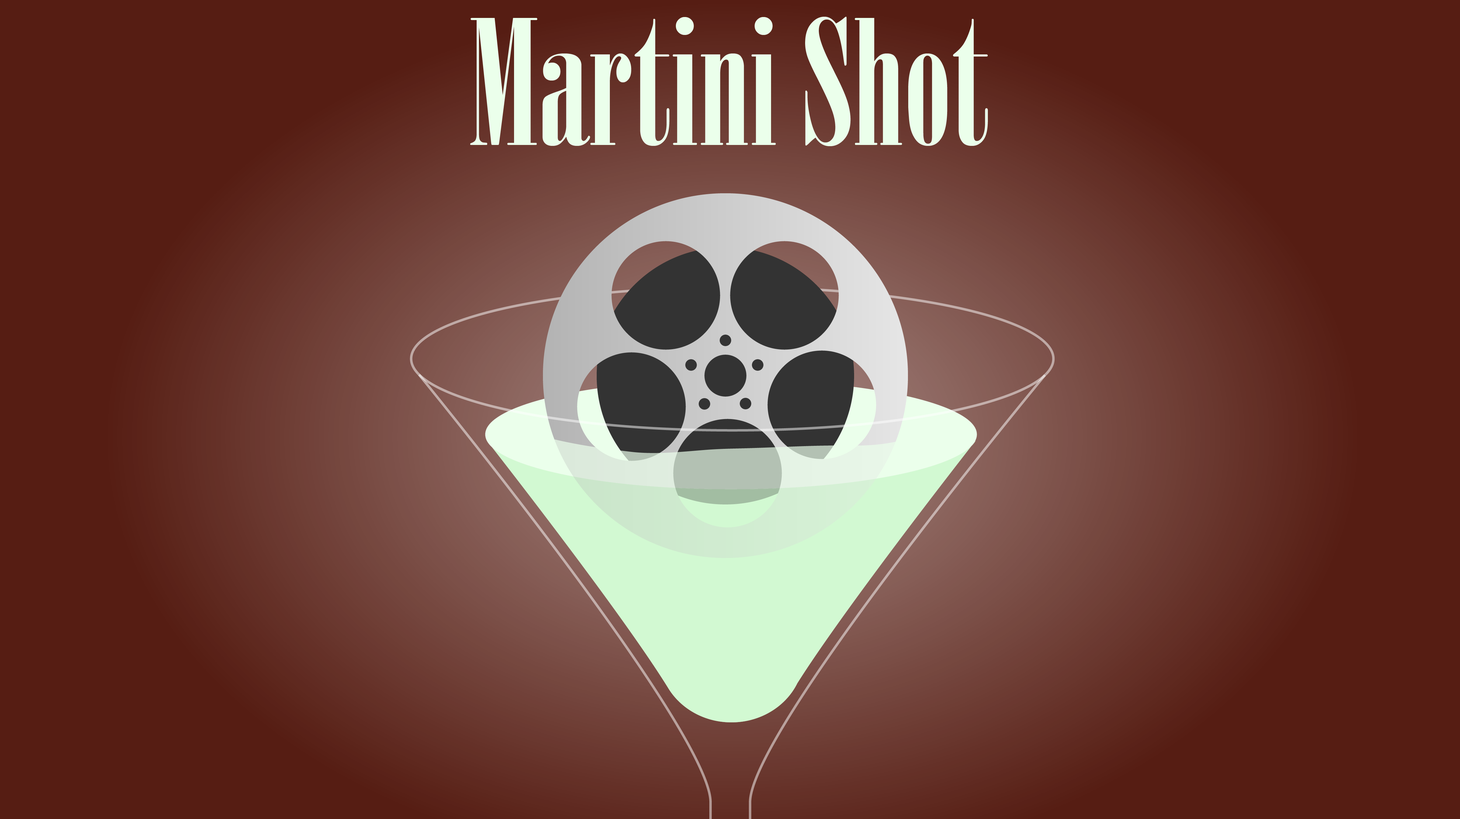 Rob wrote this Martini Shot on a conference call. He also bought a ticket to New York. He does a lot of things when he's on a conference call. Except pay attention.